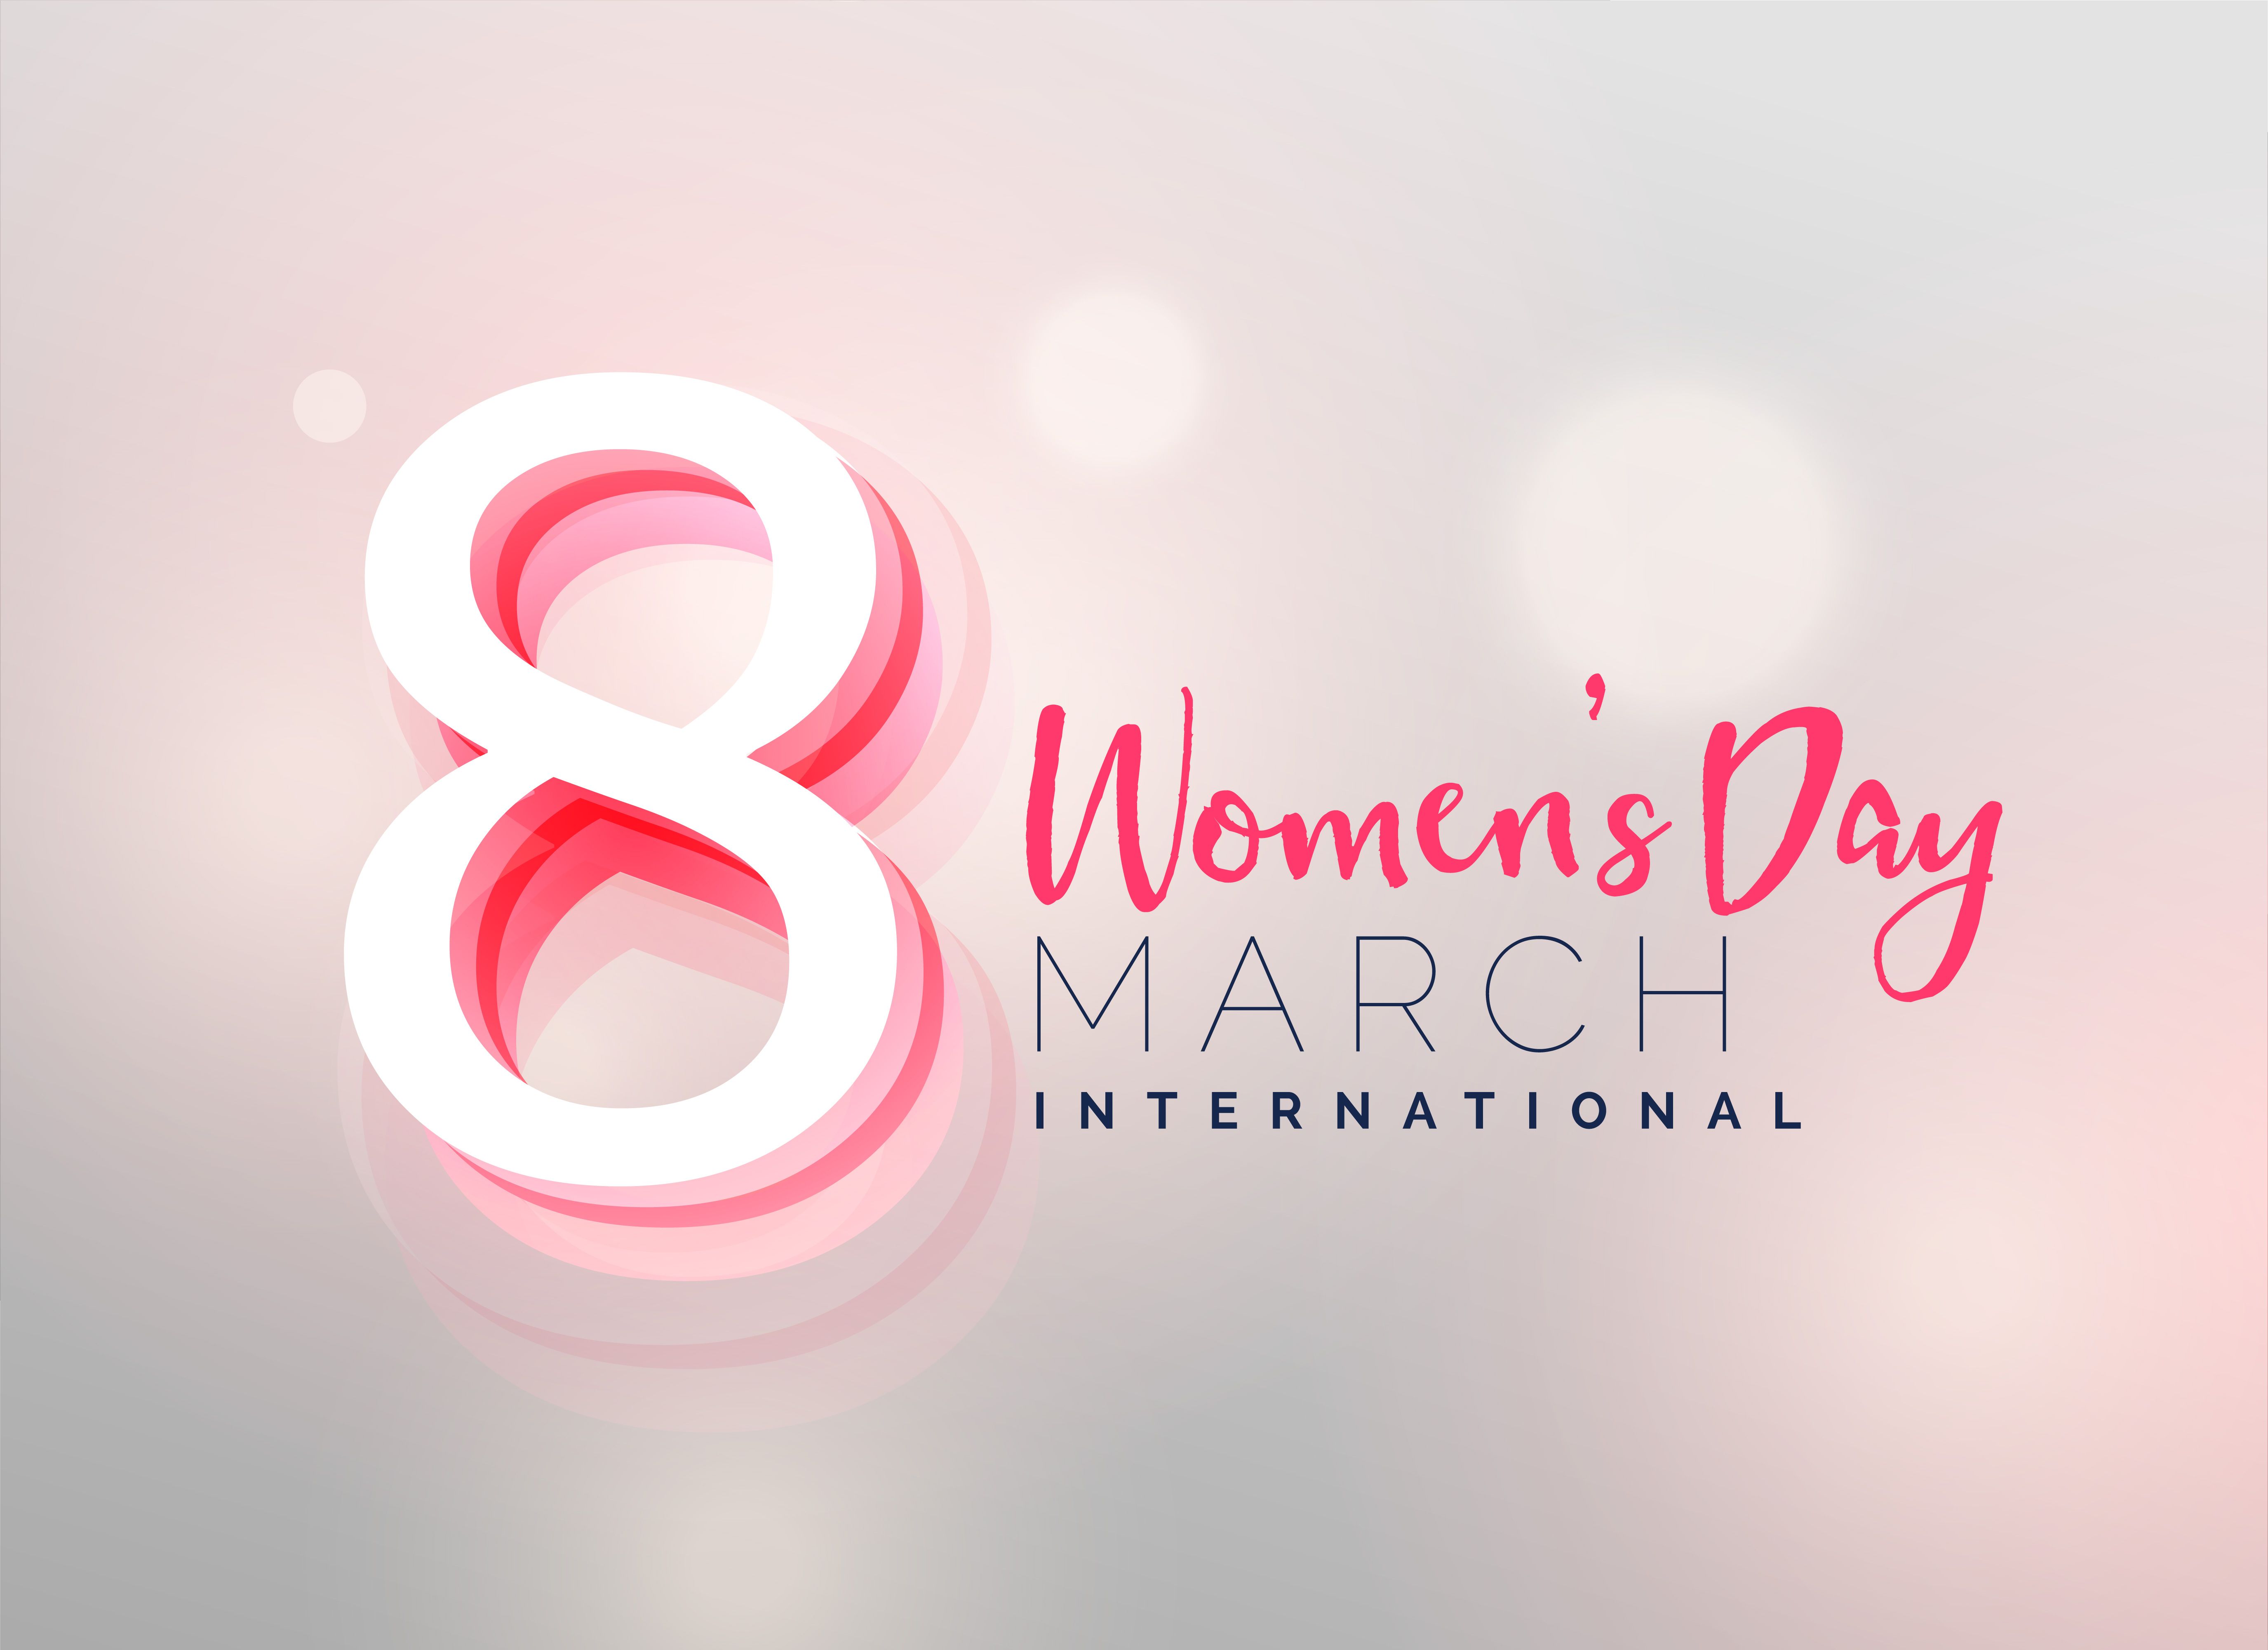 Awesome Women's Day Wallpaper Design Design, Download